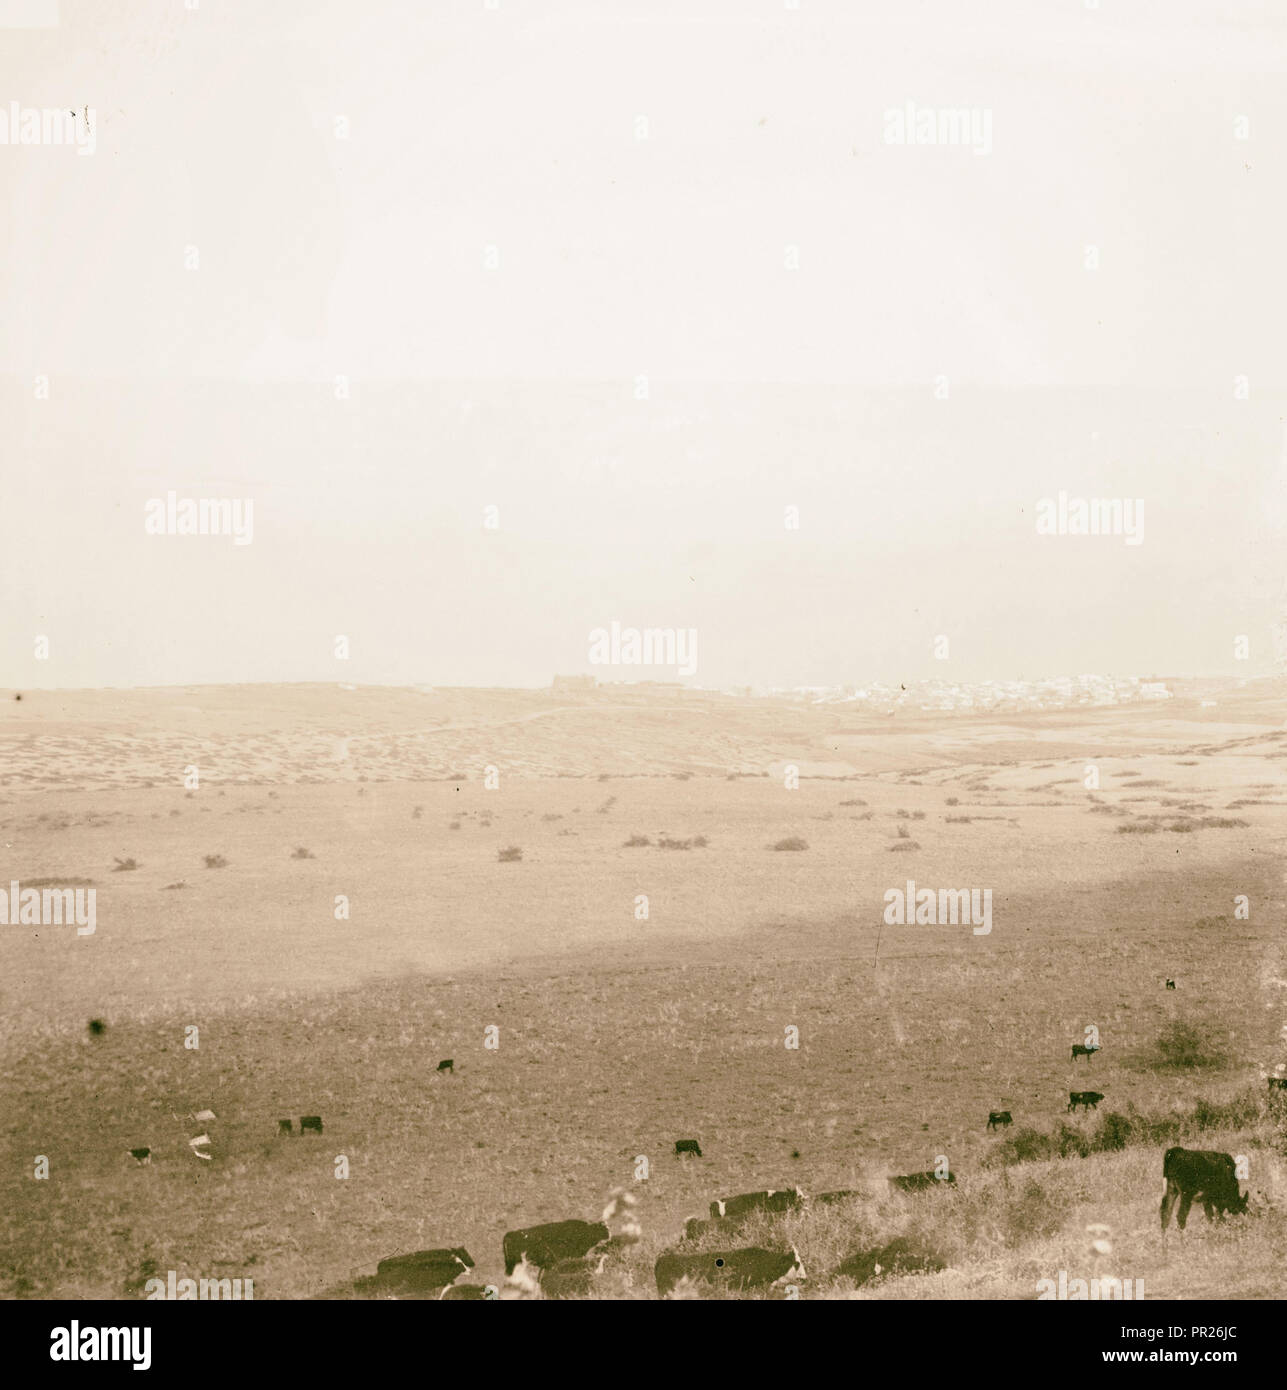 Cows grazing in a field. 1898, Middle East, Israel and/or Palestine Stock Photo